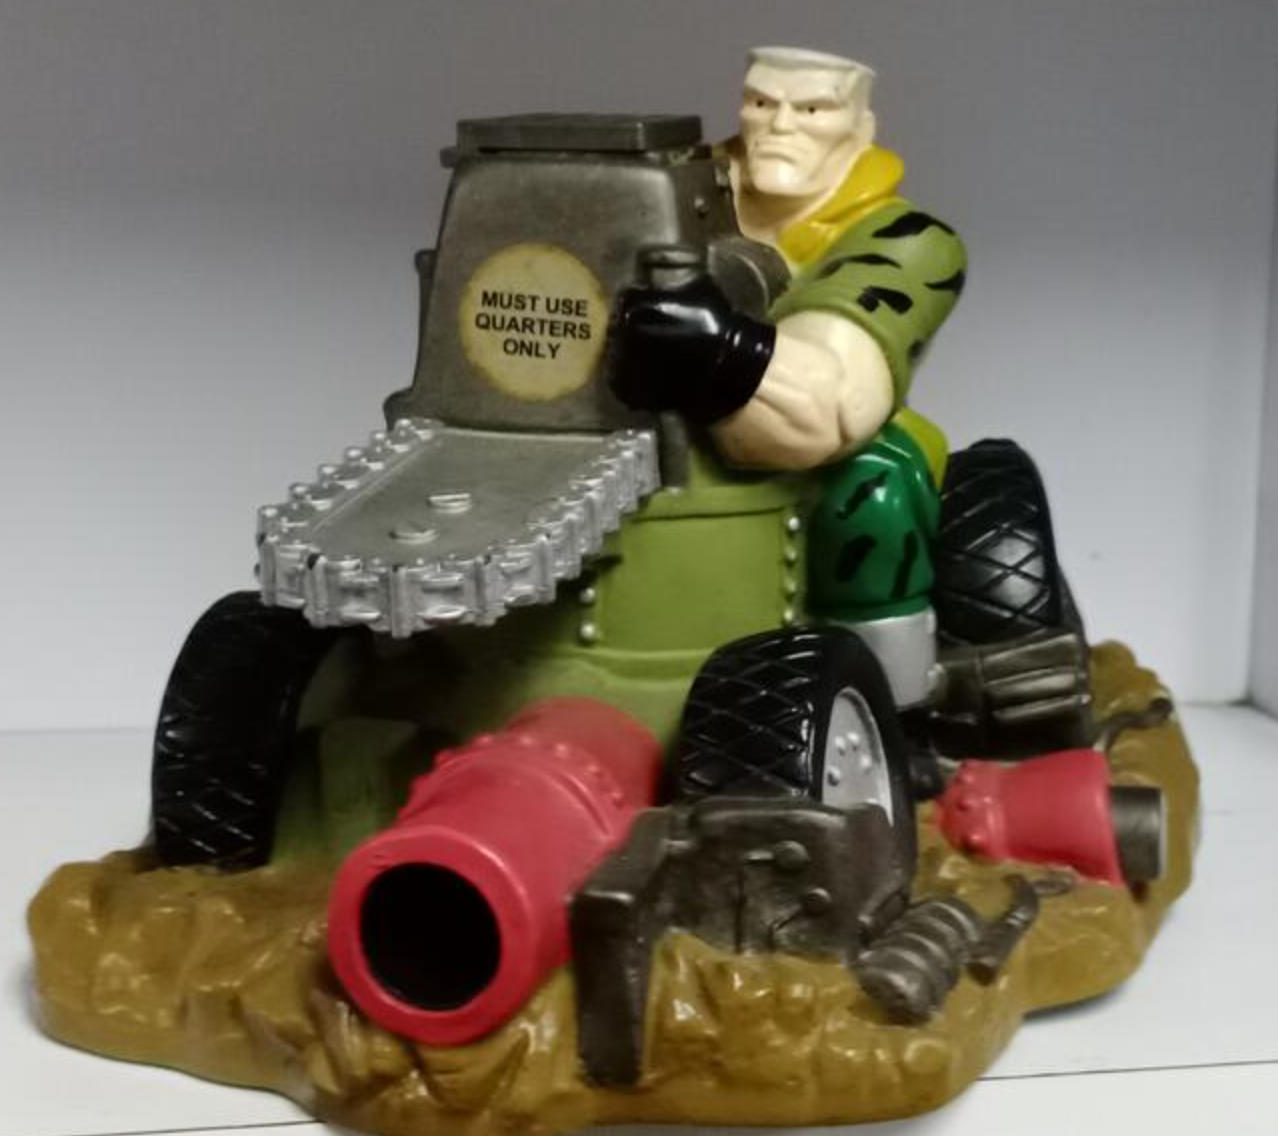 1998 Small Soldiers Coin Bank Figure